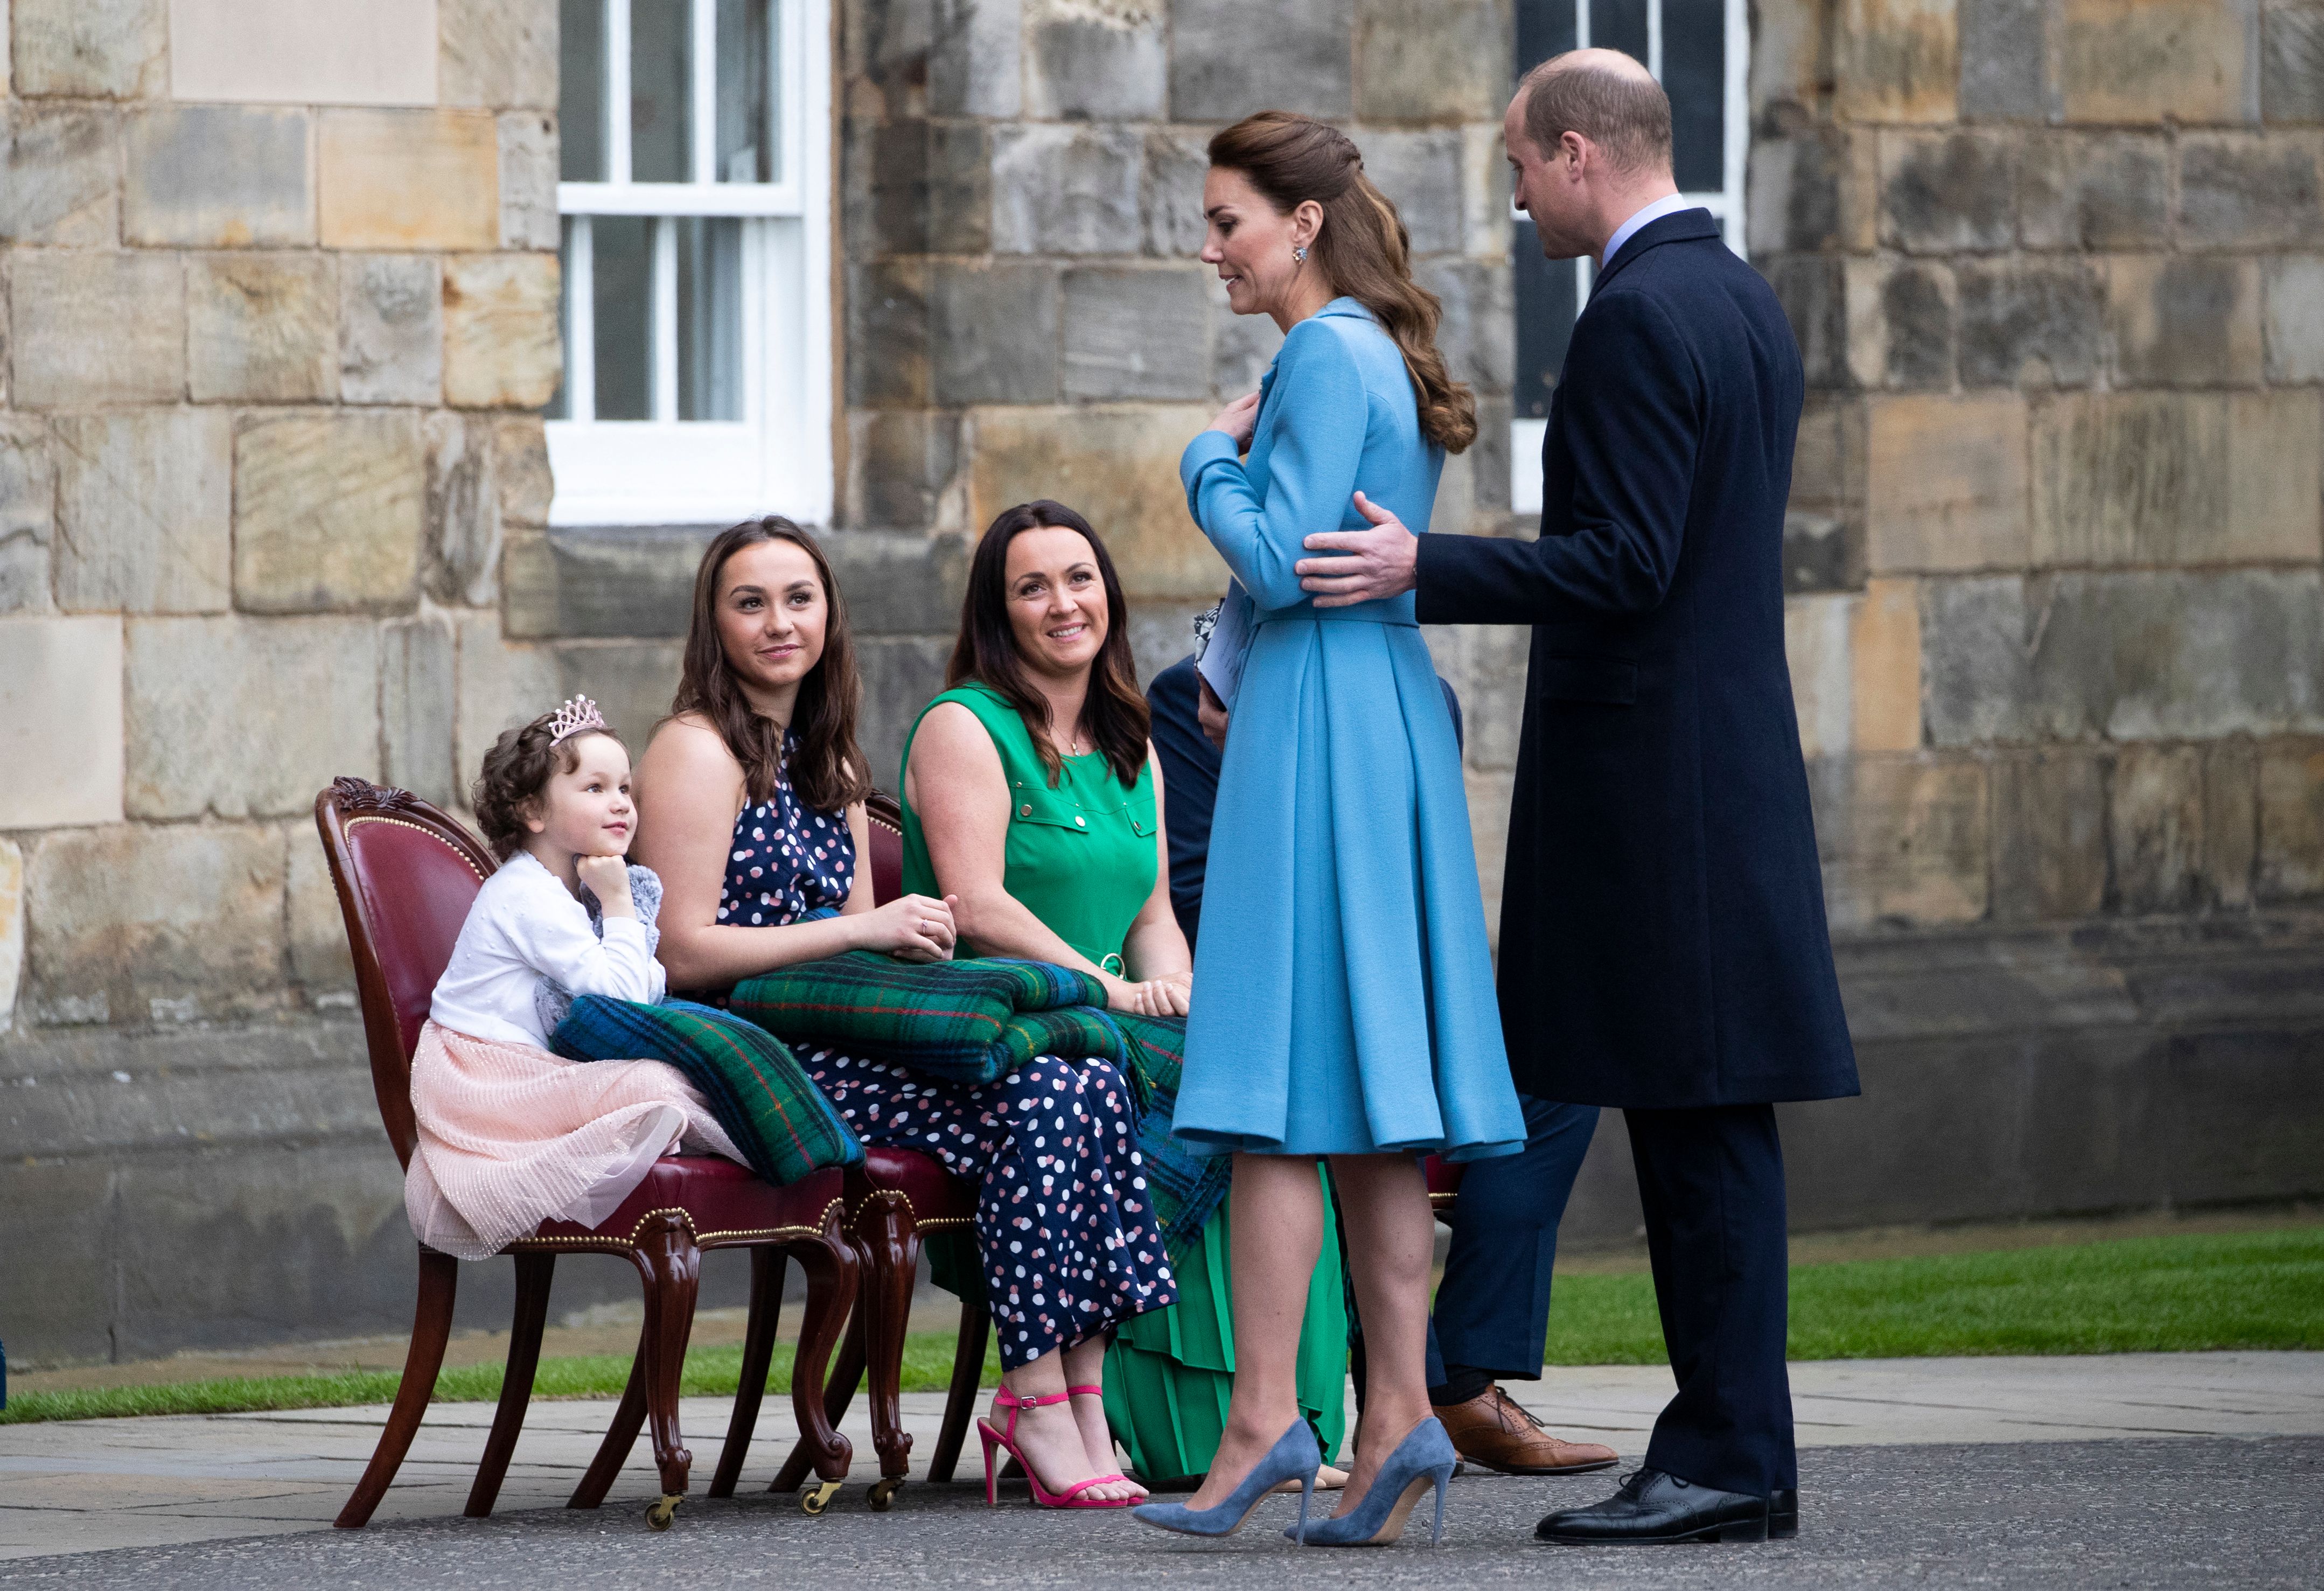 Five year-old cancer patient Mila Sneddon (L), who features in an image from the Hold Still photography project, speaks to Prince William and Princess Kate as special guests of the Royal couple, at the Palace of Holyroodhouse in Edinburgh, Scotland on May 27, 2021 | Source: Getty Images